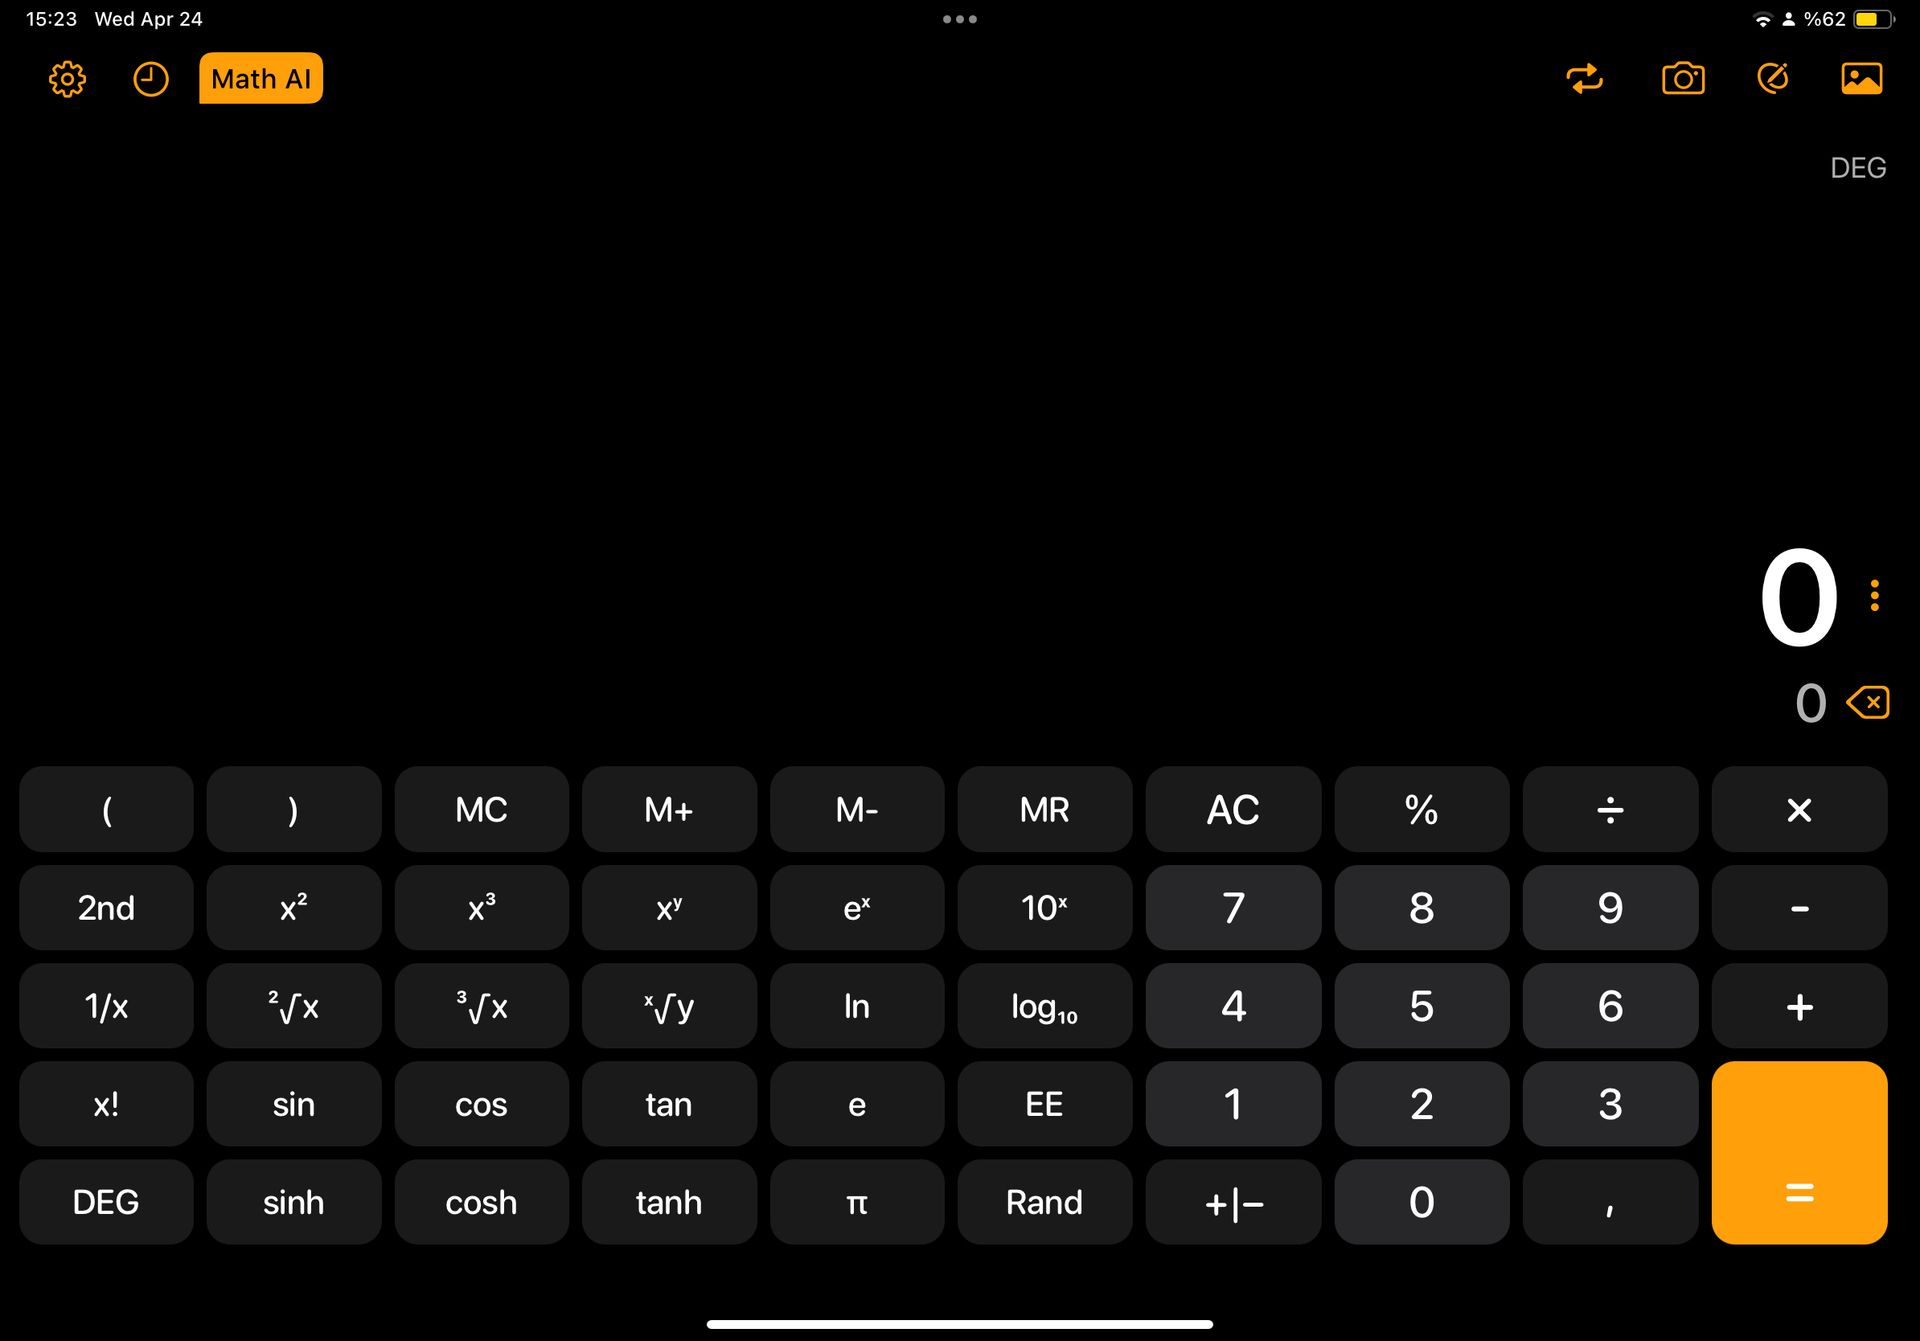 Apple calculator coming to iPad: Where has it been all this time?